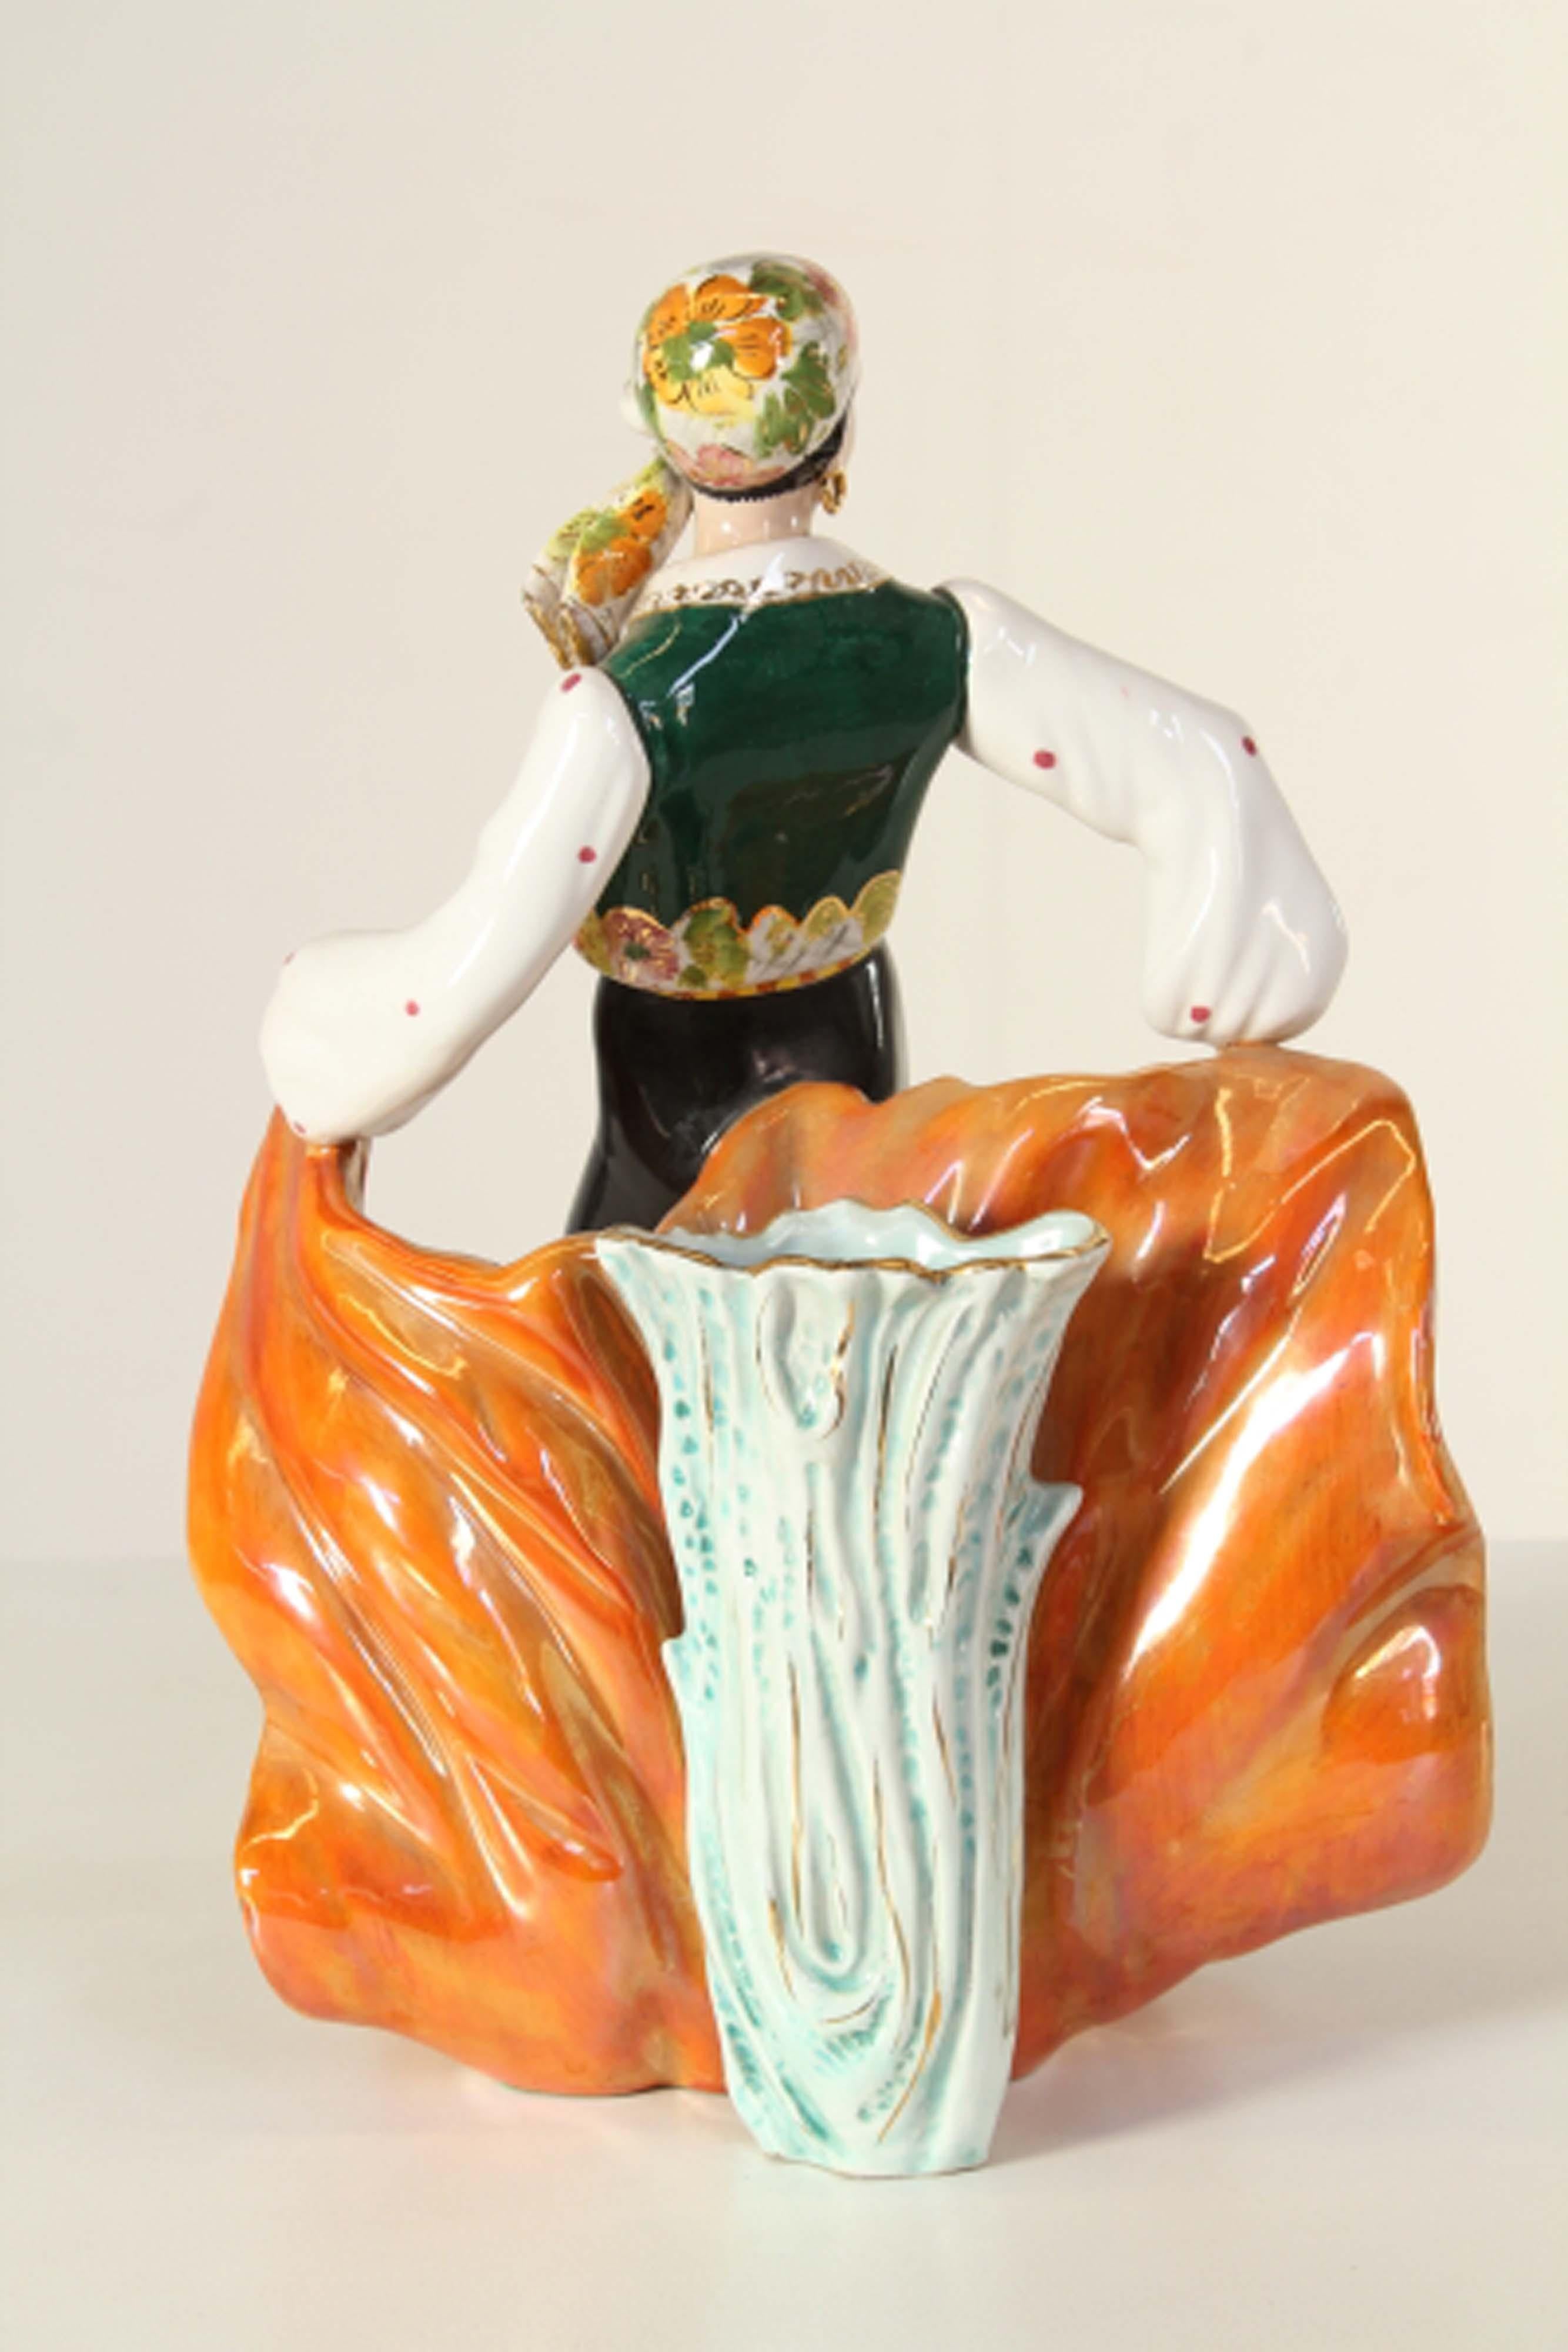 Beautiful execution of this gypsy dancer figure that expresses sweetness, the young dancer a little effeminate, in an attempt to twirl the cloth tramples him, the red cheeks identify embarrassment. Beautiful colors and sculptural execution. signed